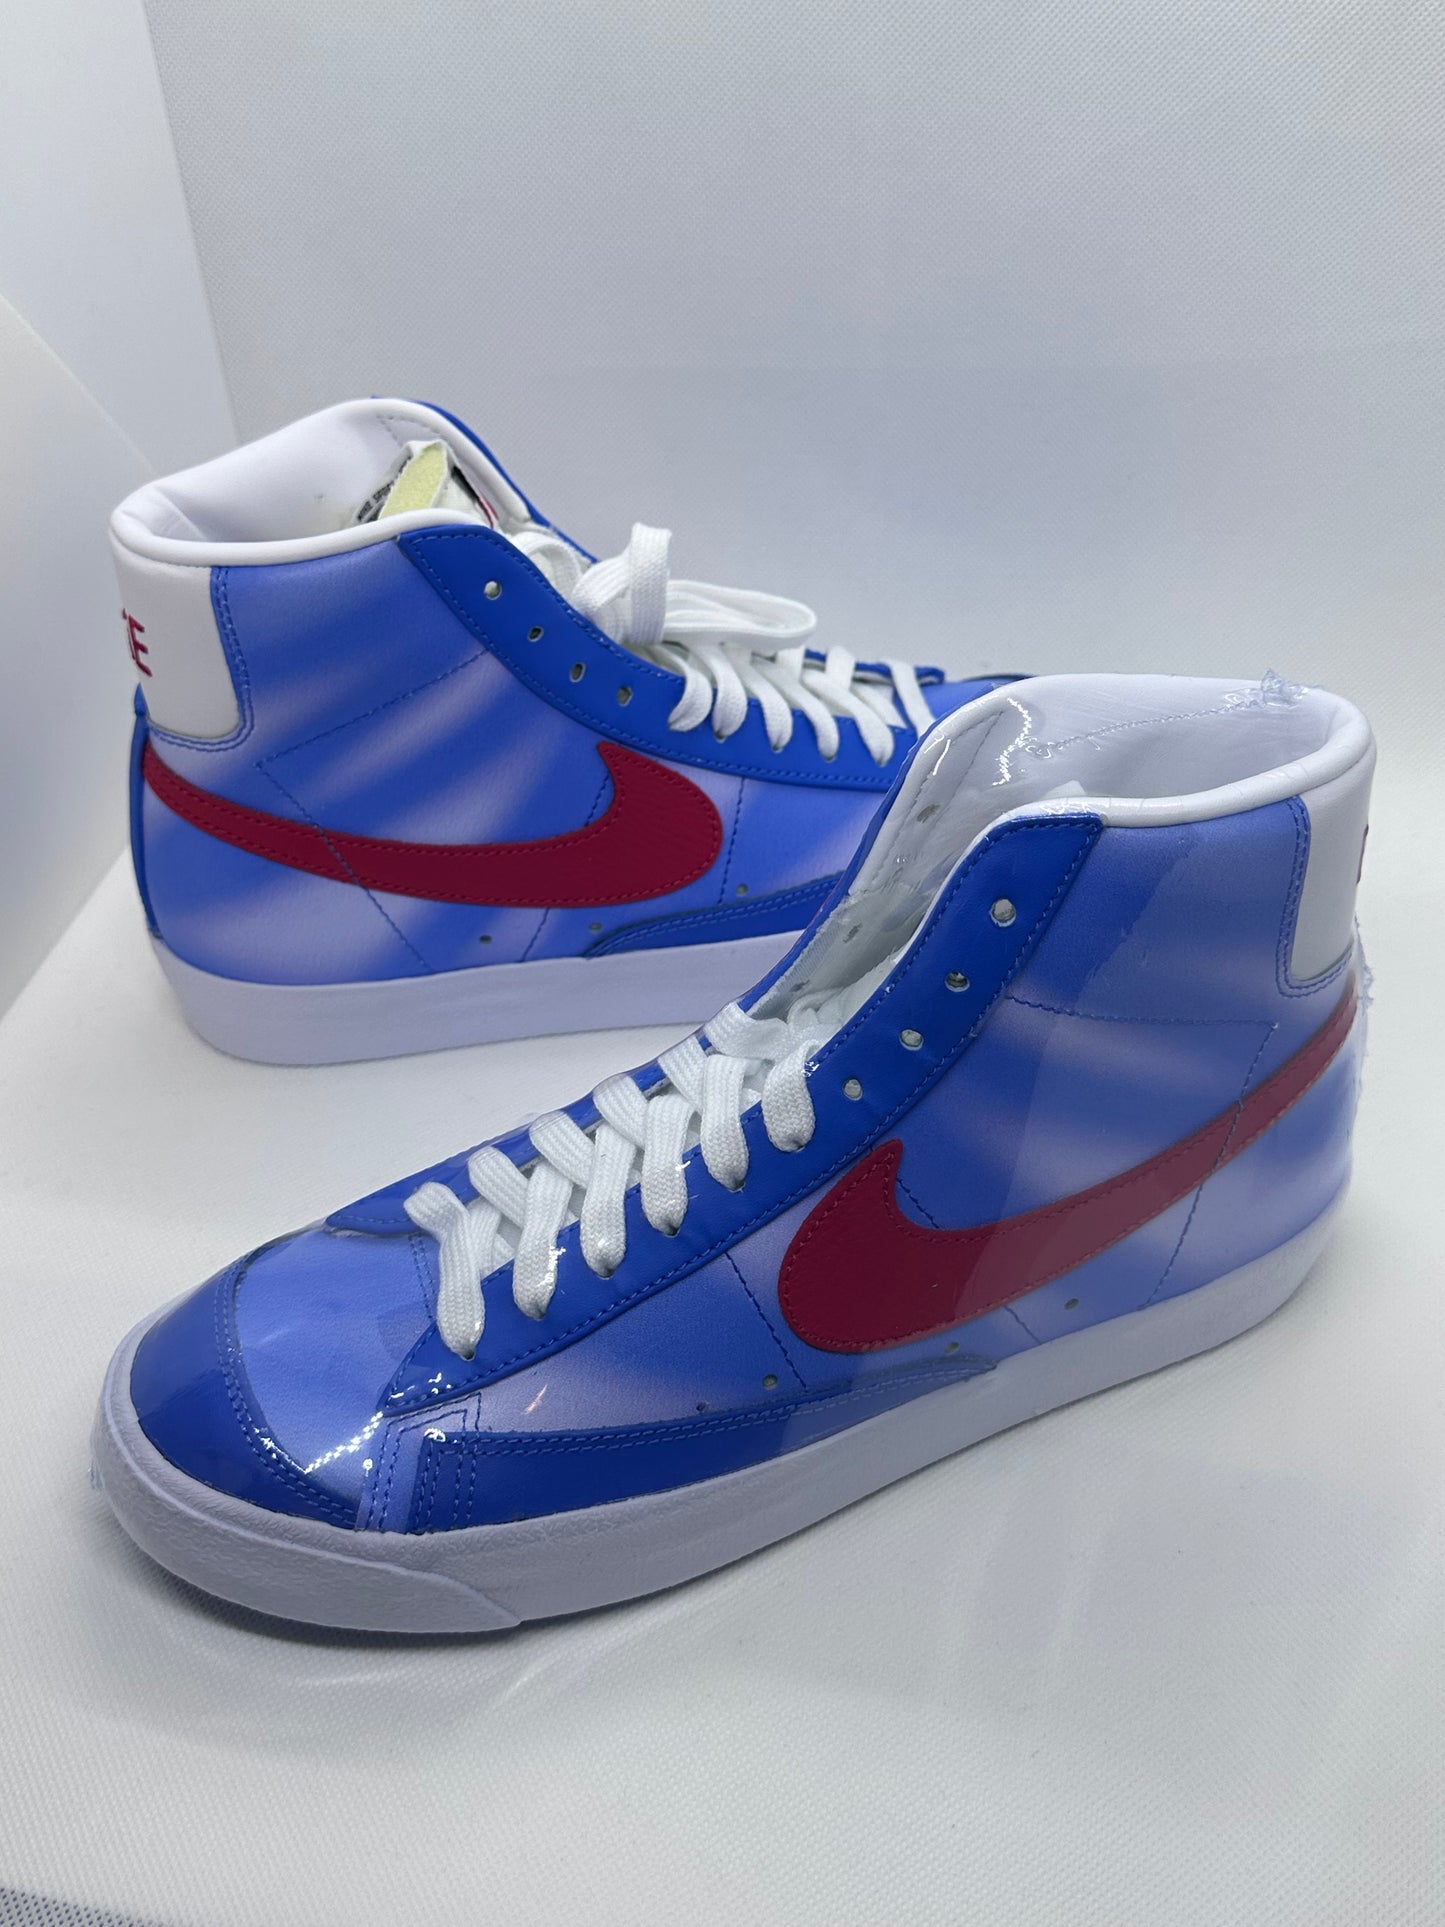 Nike Blazer Mid 77 Pacific Blue Red